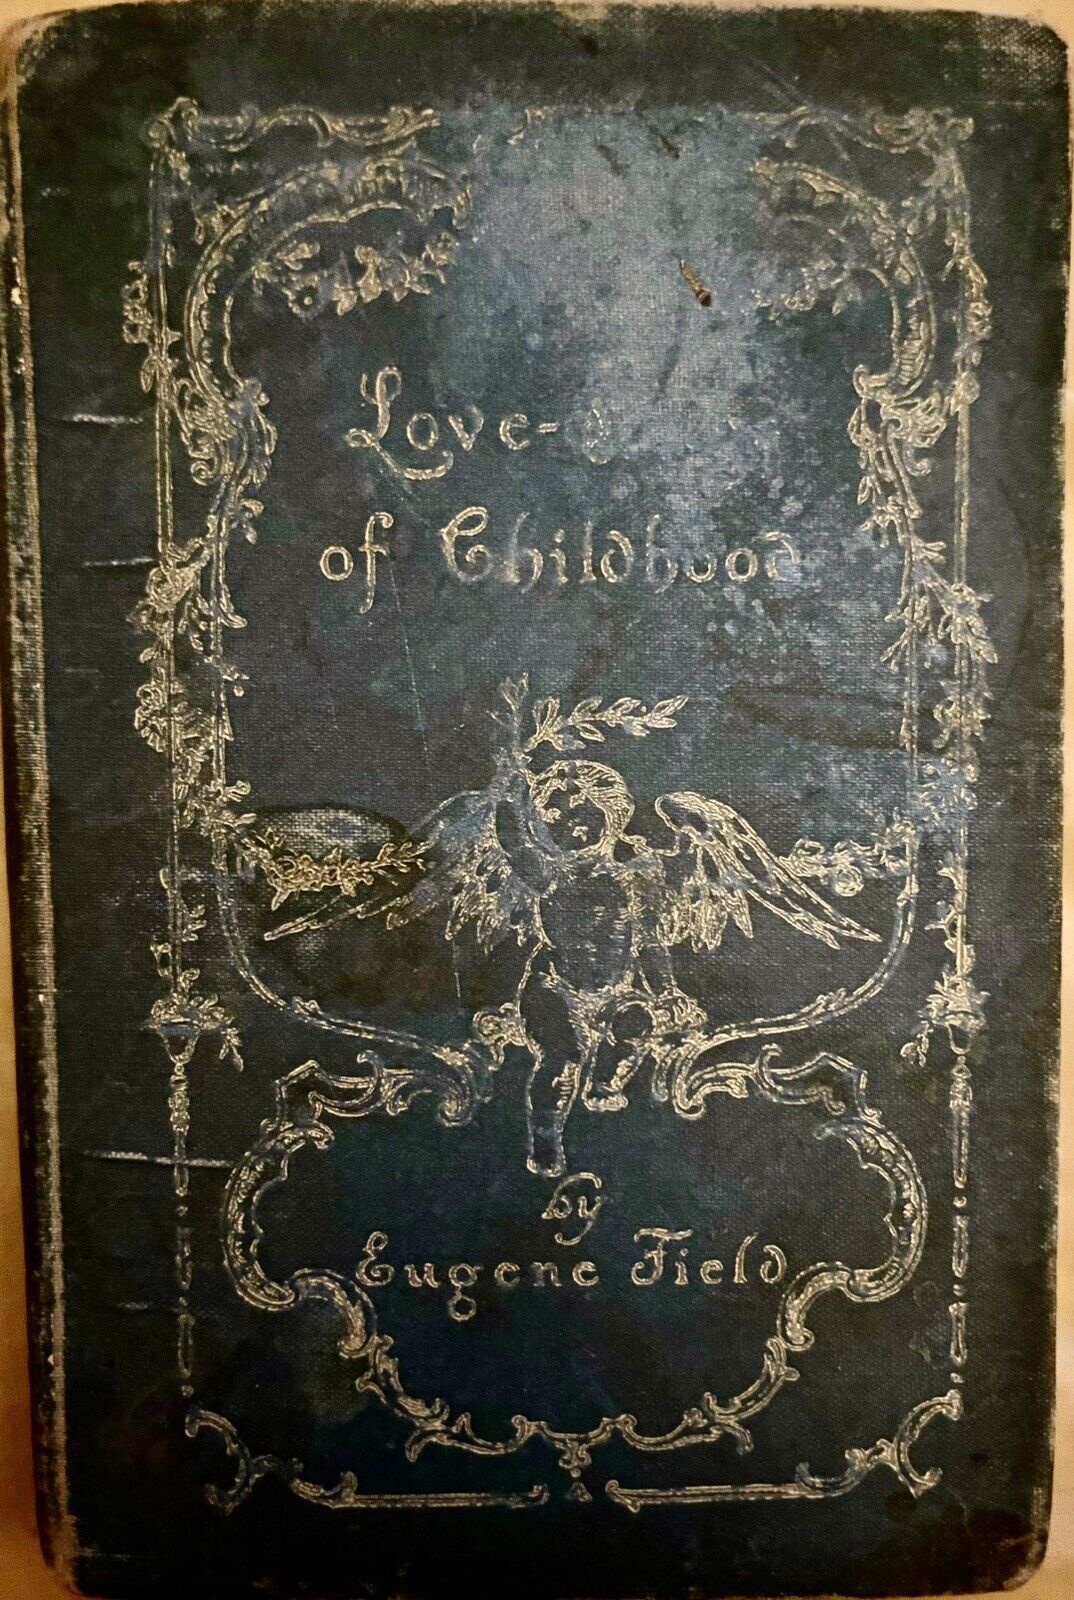 LOVE SONGS OF CHILDHOOD FIRST EDITION BY EUGENE FIELD 1894.